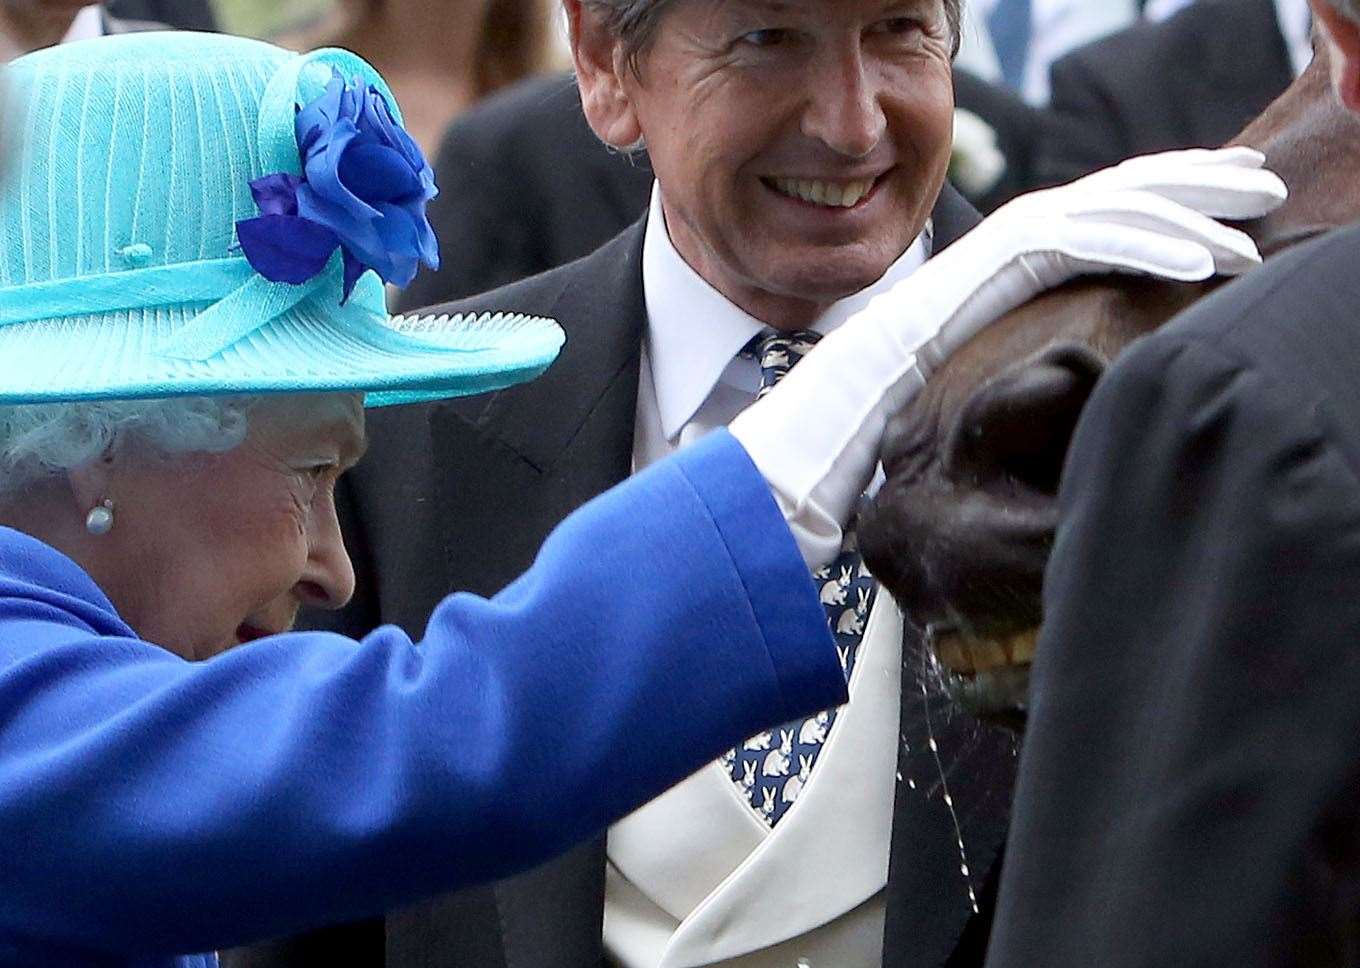 The Queen greets Dartmouth, in the winners’ enclosure, after winning the Hardwicke stakes at Royal Ascot 2016 (Steve Parsons/PA)